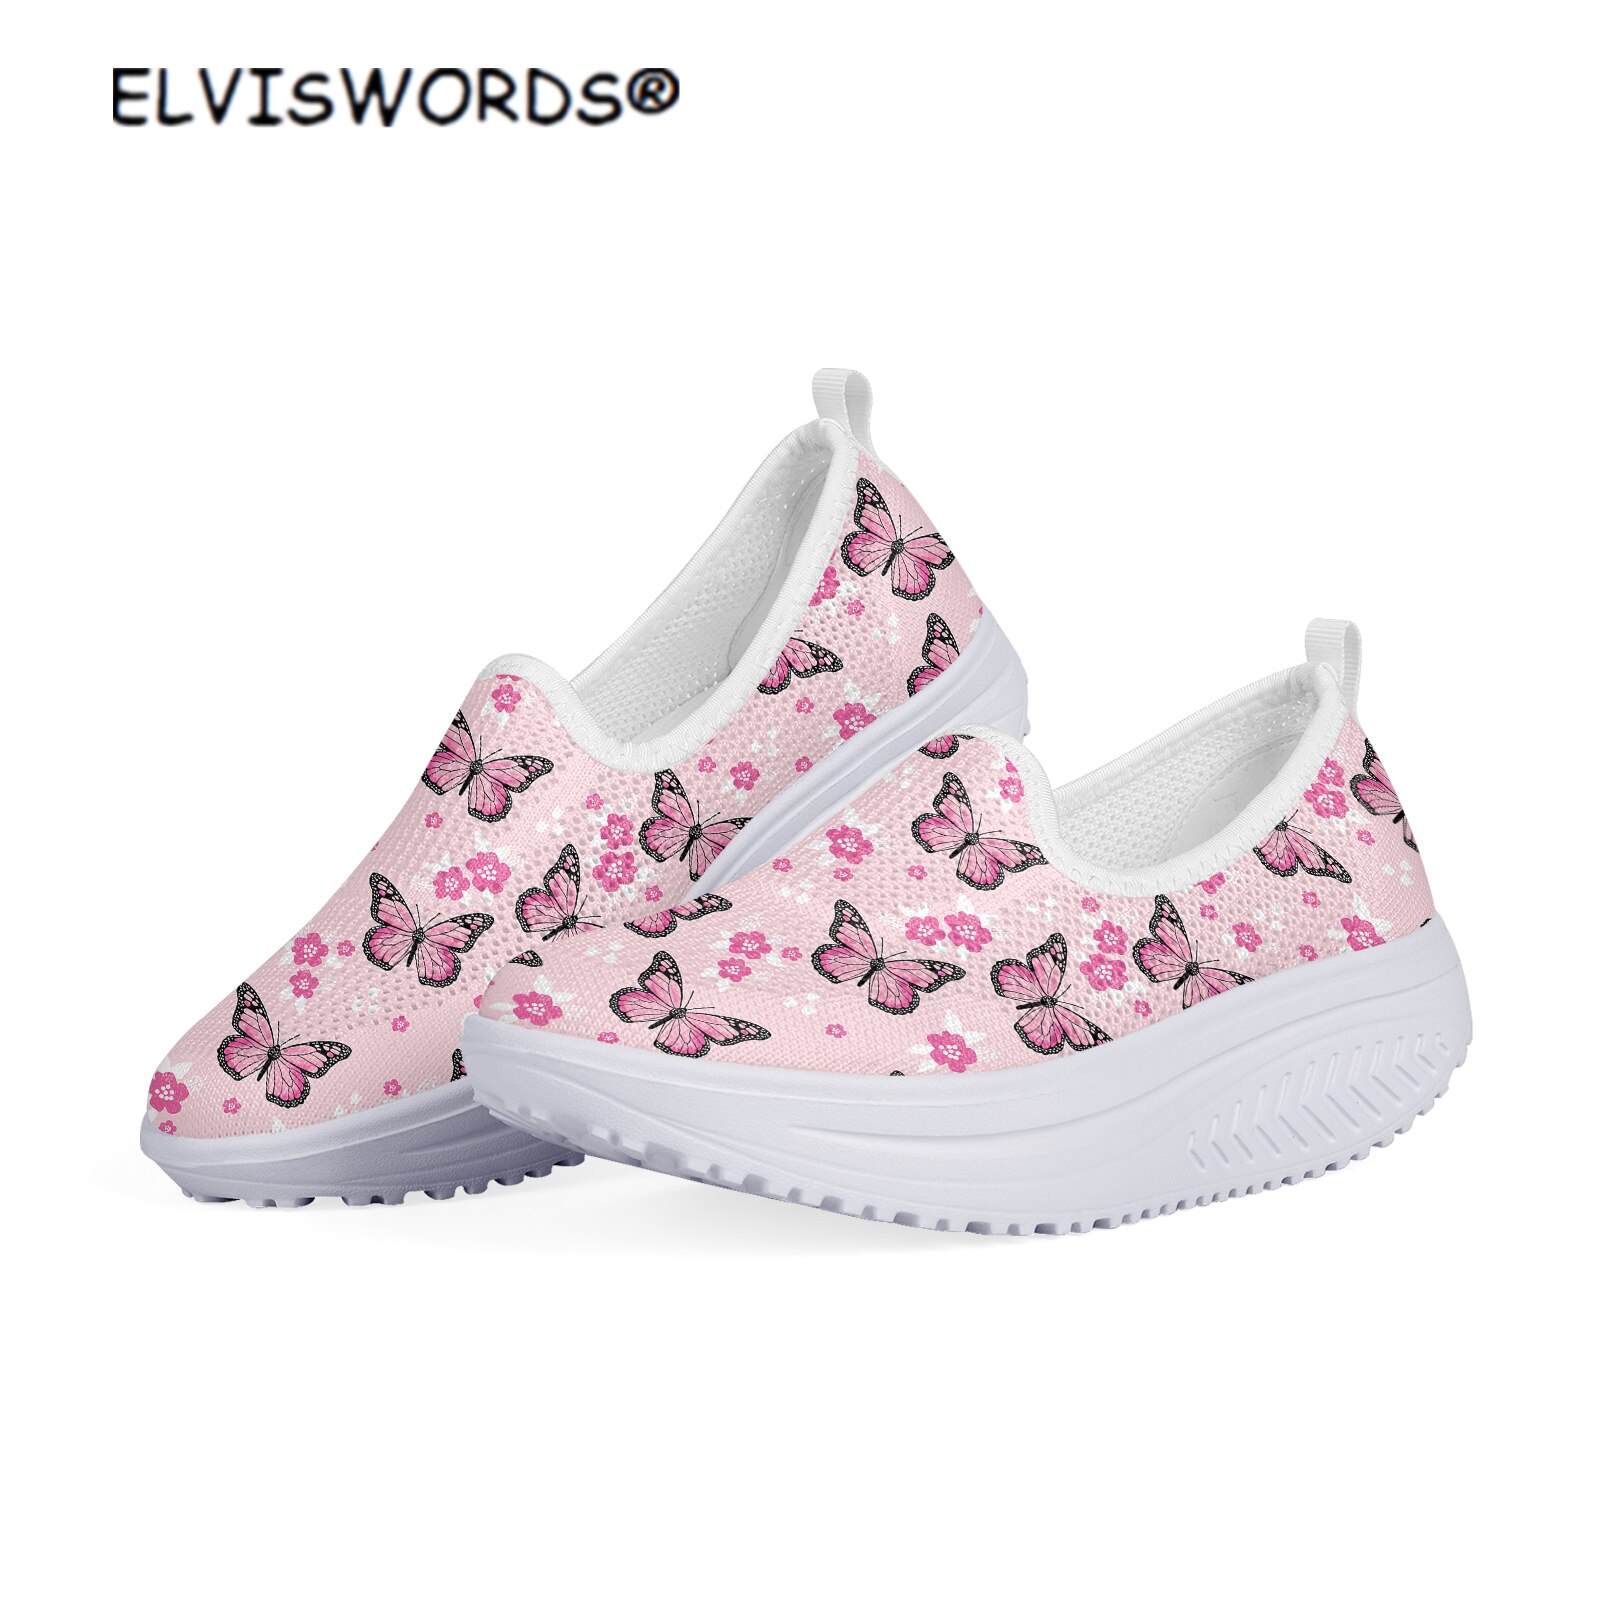 ELVISWORDS Stylish Butterfly Print Breathable Walking Shoes for Women Ladies Non-slip Slip on Flats Shoes Platform zapatos mujer